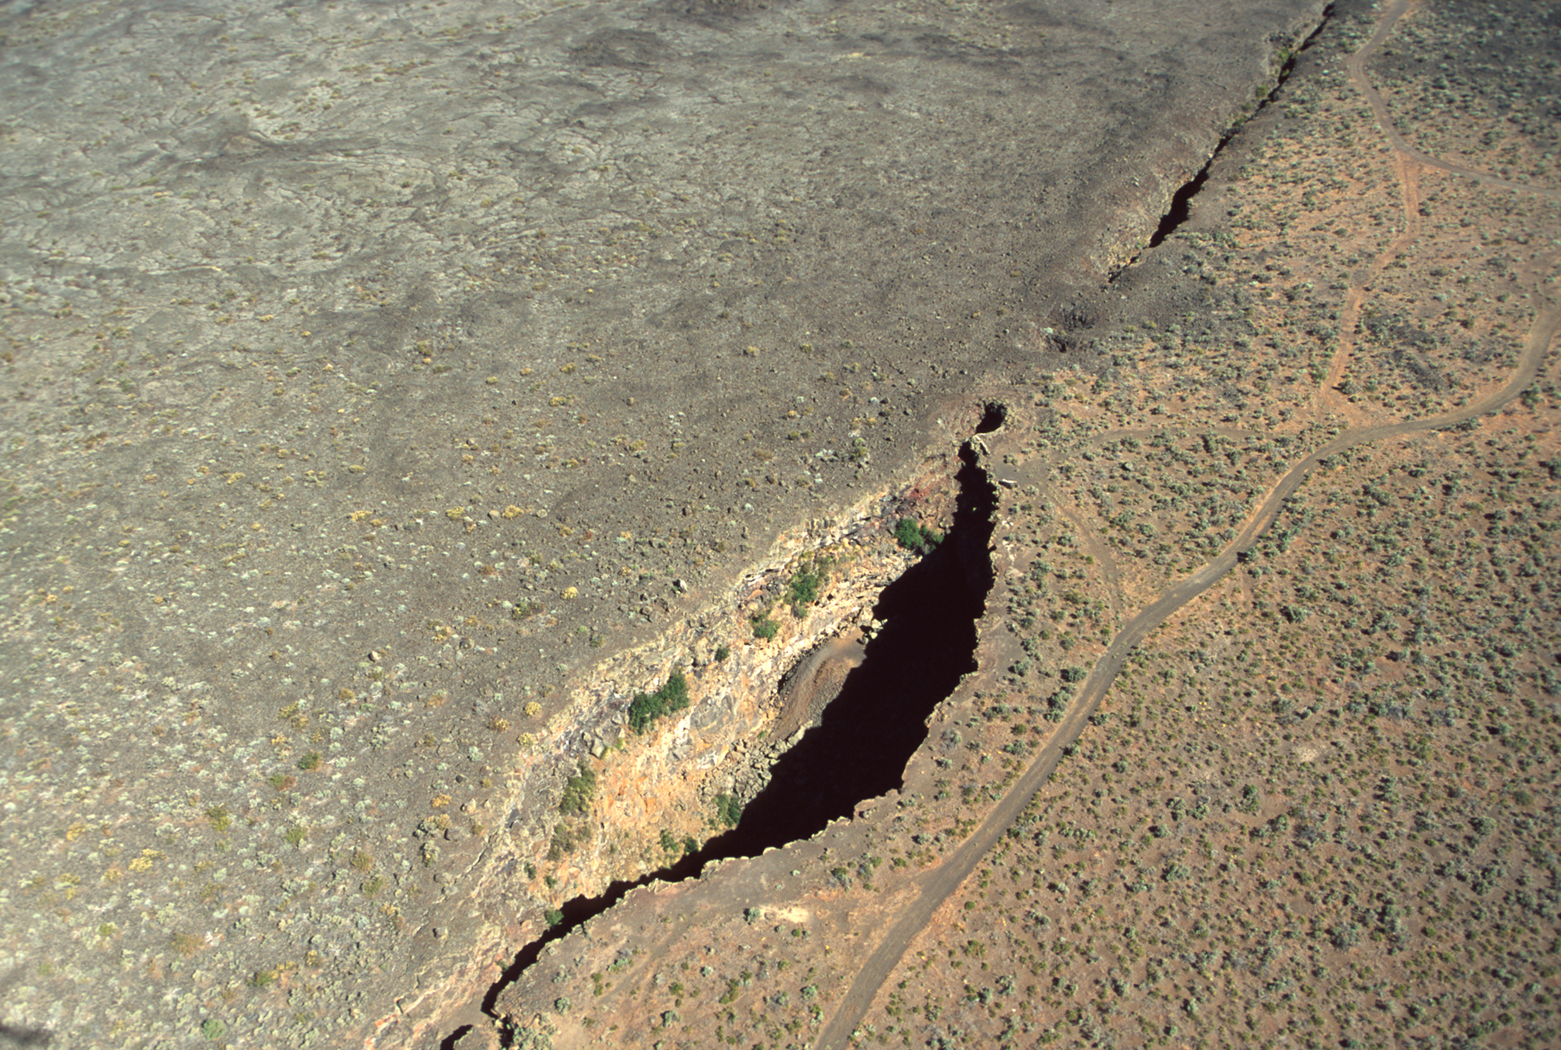 a deep fissure in the ground with a large open chasm in it